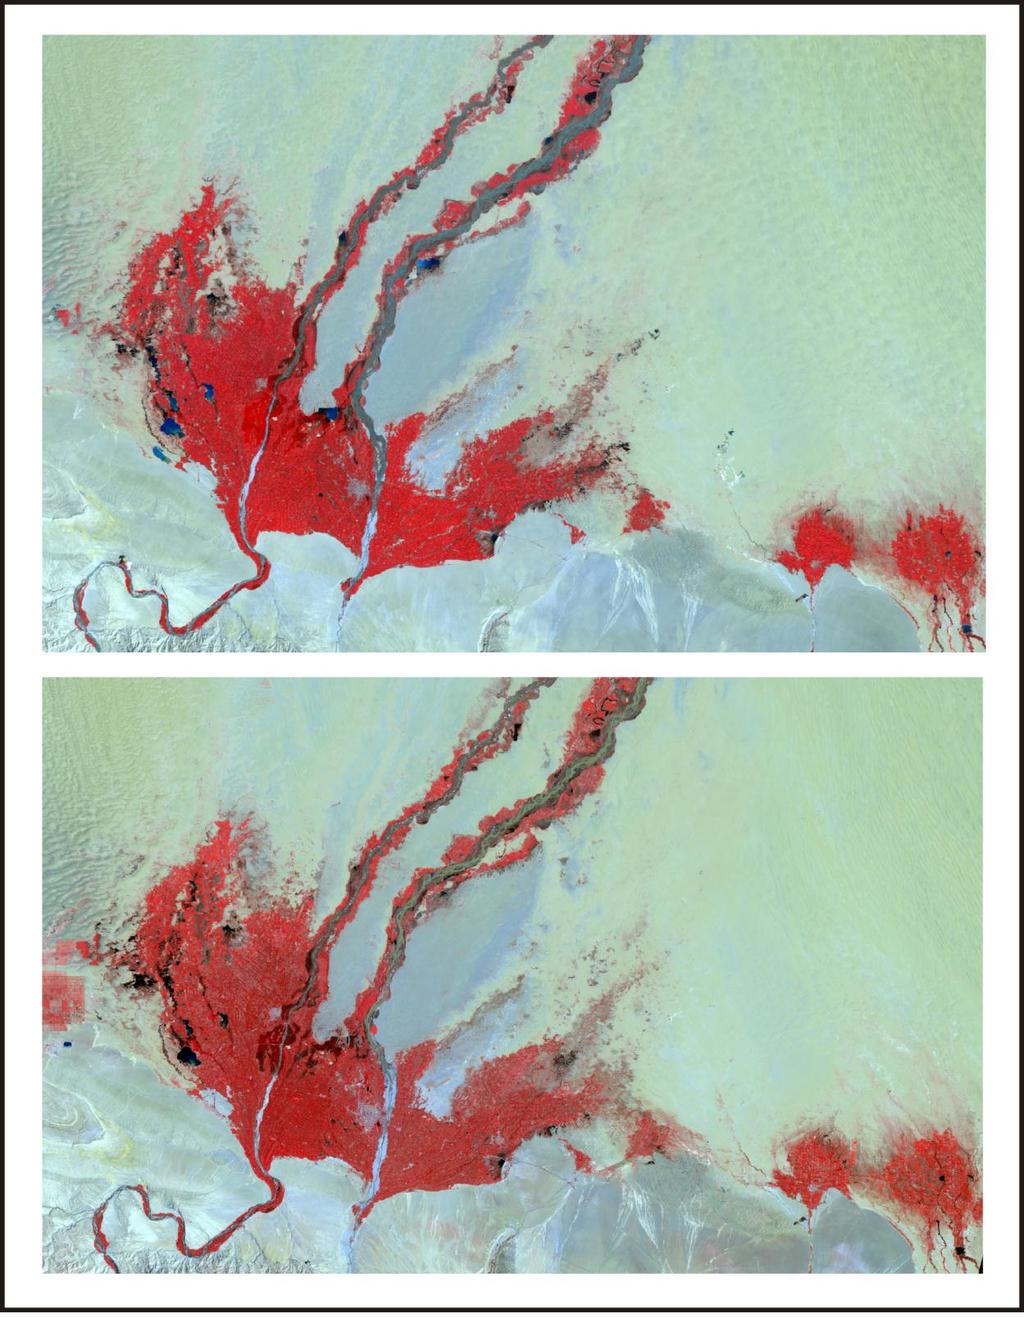 Figure 2: Three major cities in the study site: Moyu (Upper; image date: 19 September 2005), Hetian (Middle; image date: 31 March 2006), and Luopu (Lower: image date: 30 April 2010).